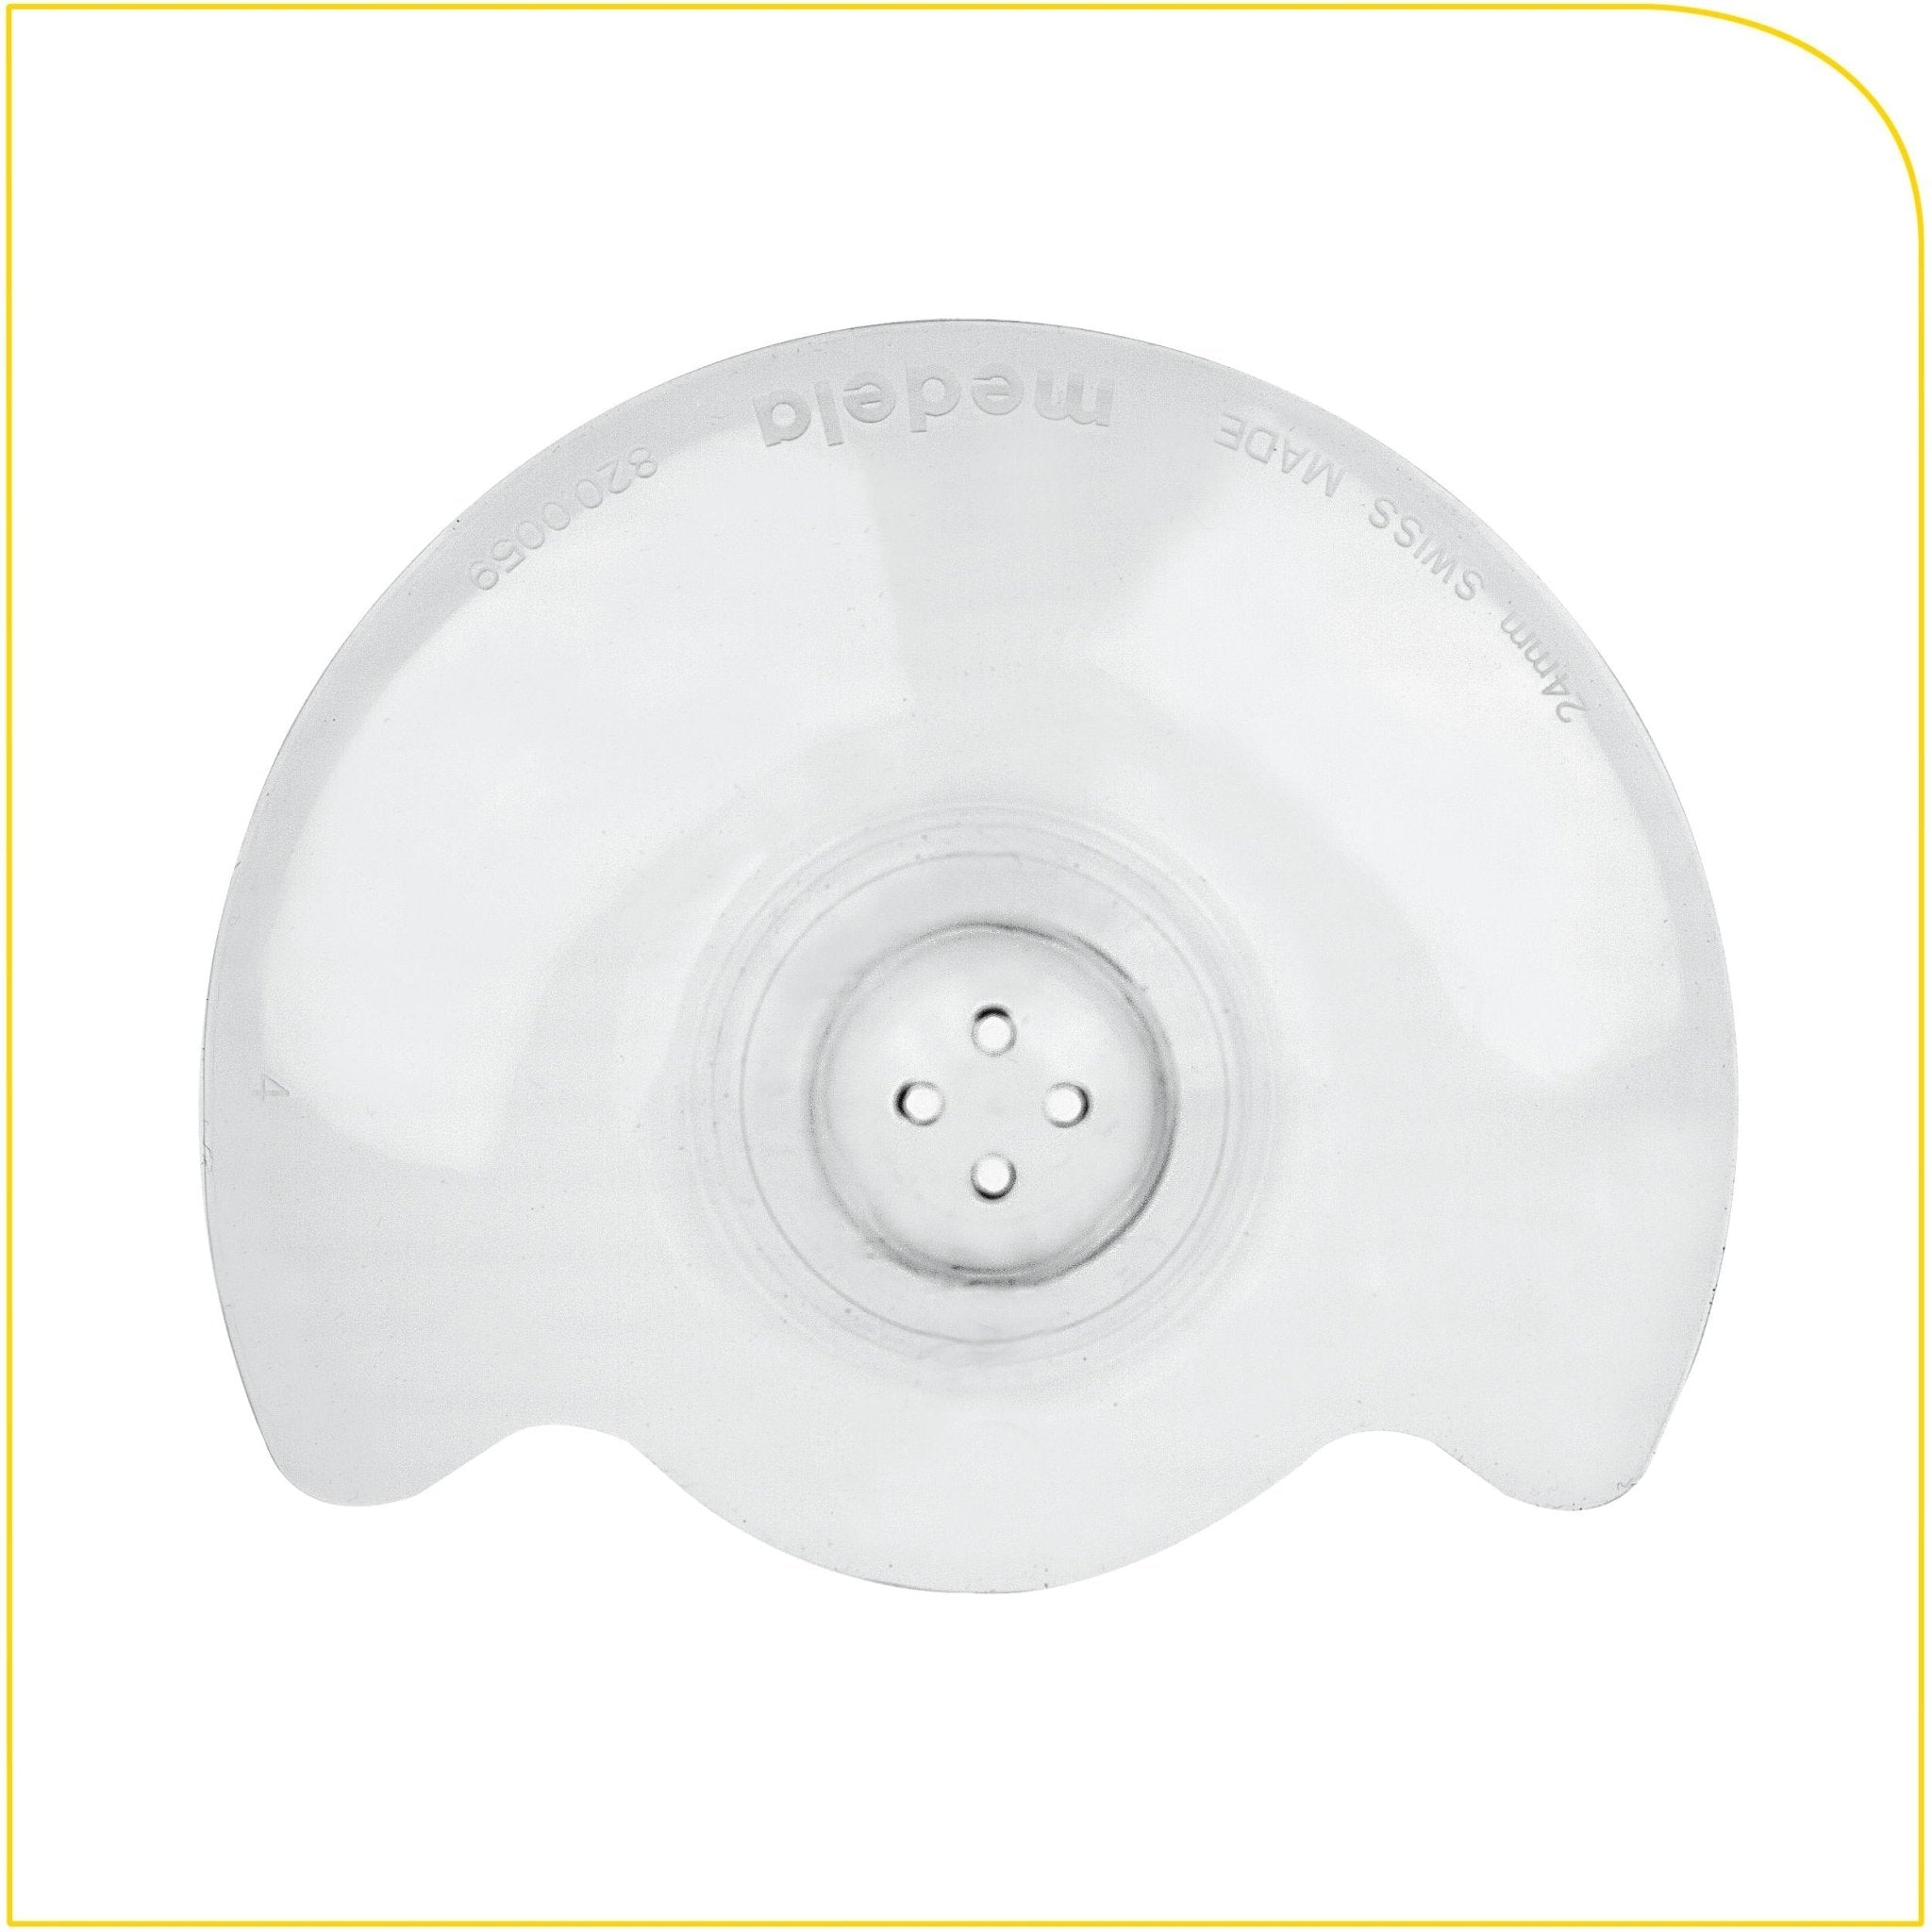 MEDELA Contact Nipple Shield - Nippleshield for Breastfeeding with Latch Difficulties - Made Without BPA  ANB Baby